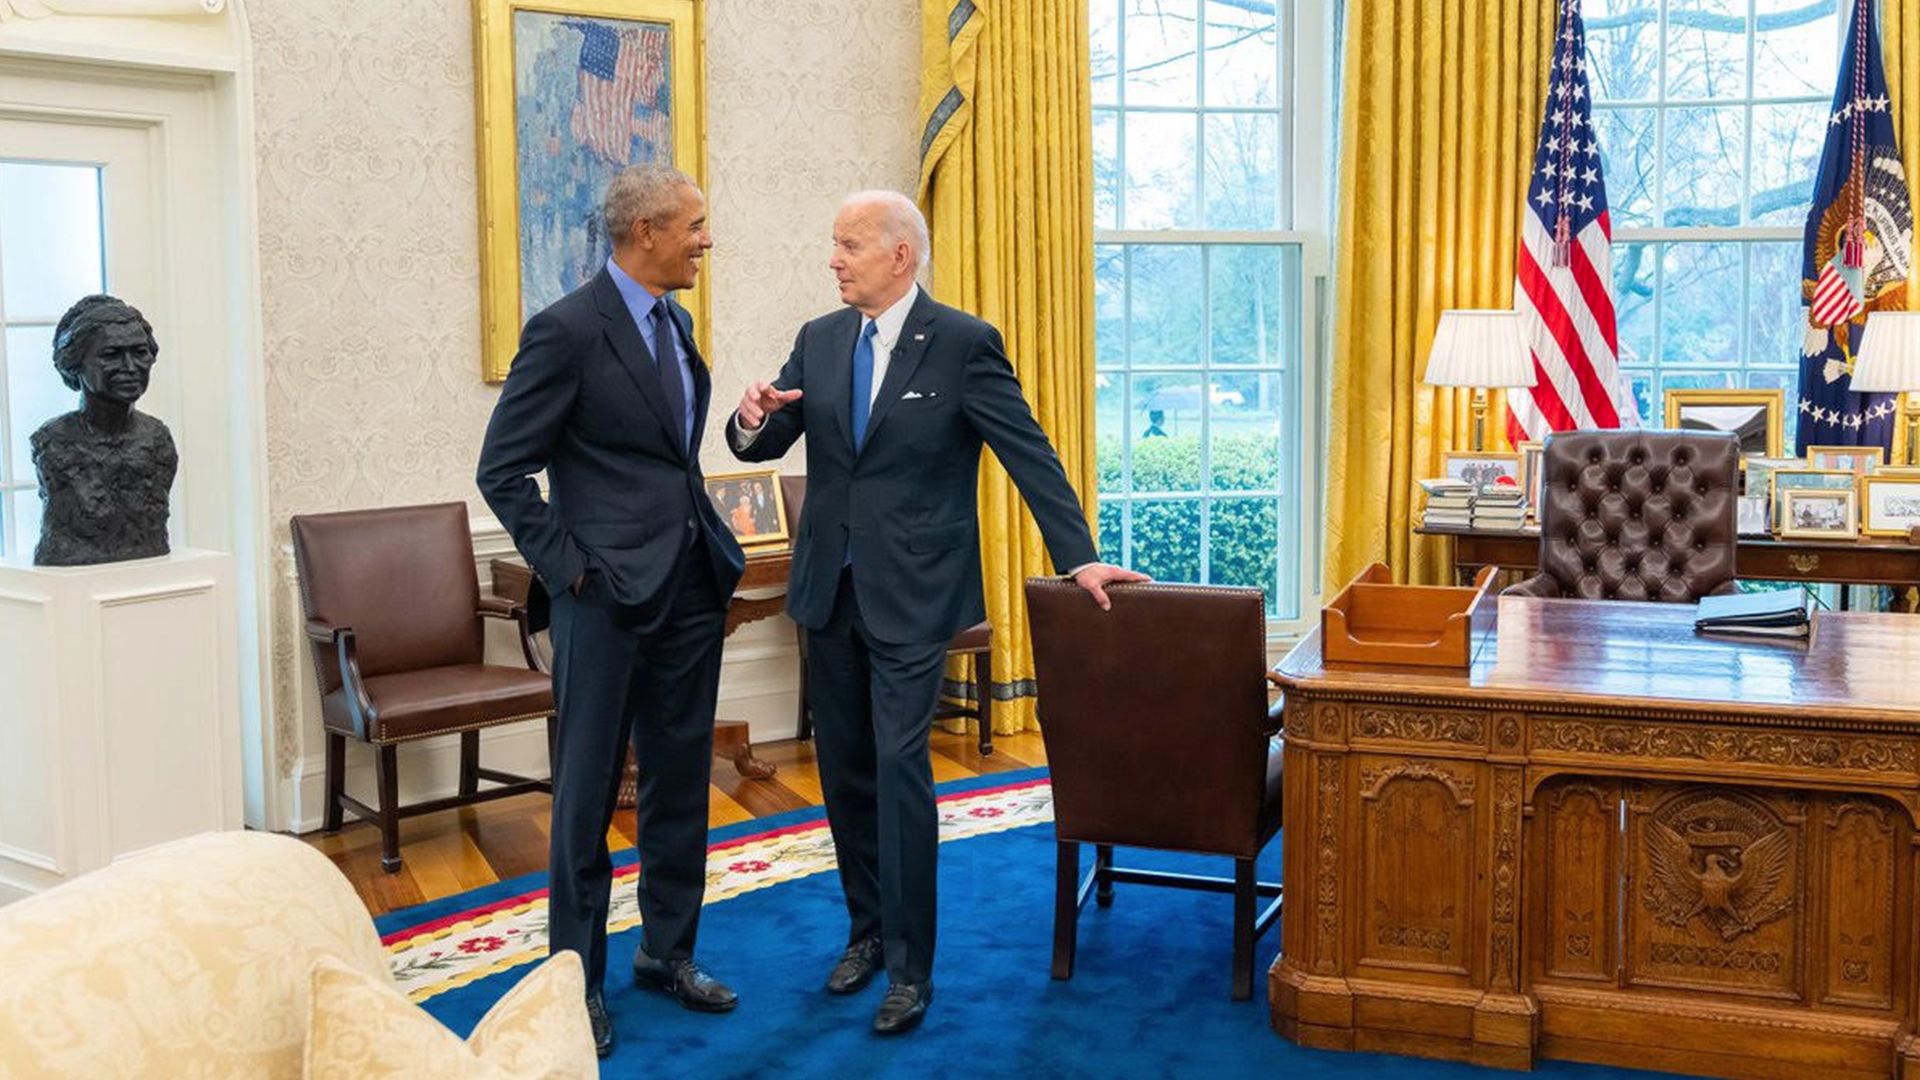 President Biden is seen standing next to former President Obama in the Oval Office as he returned to the White House for the first time since leaving office.